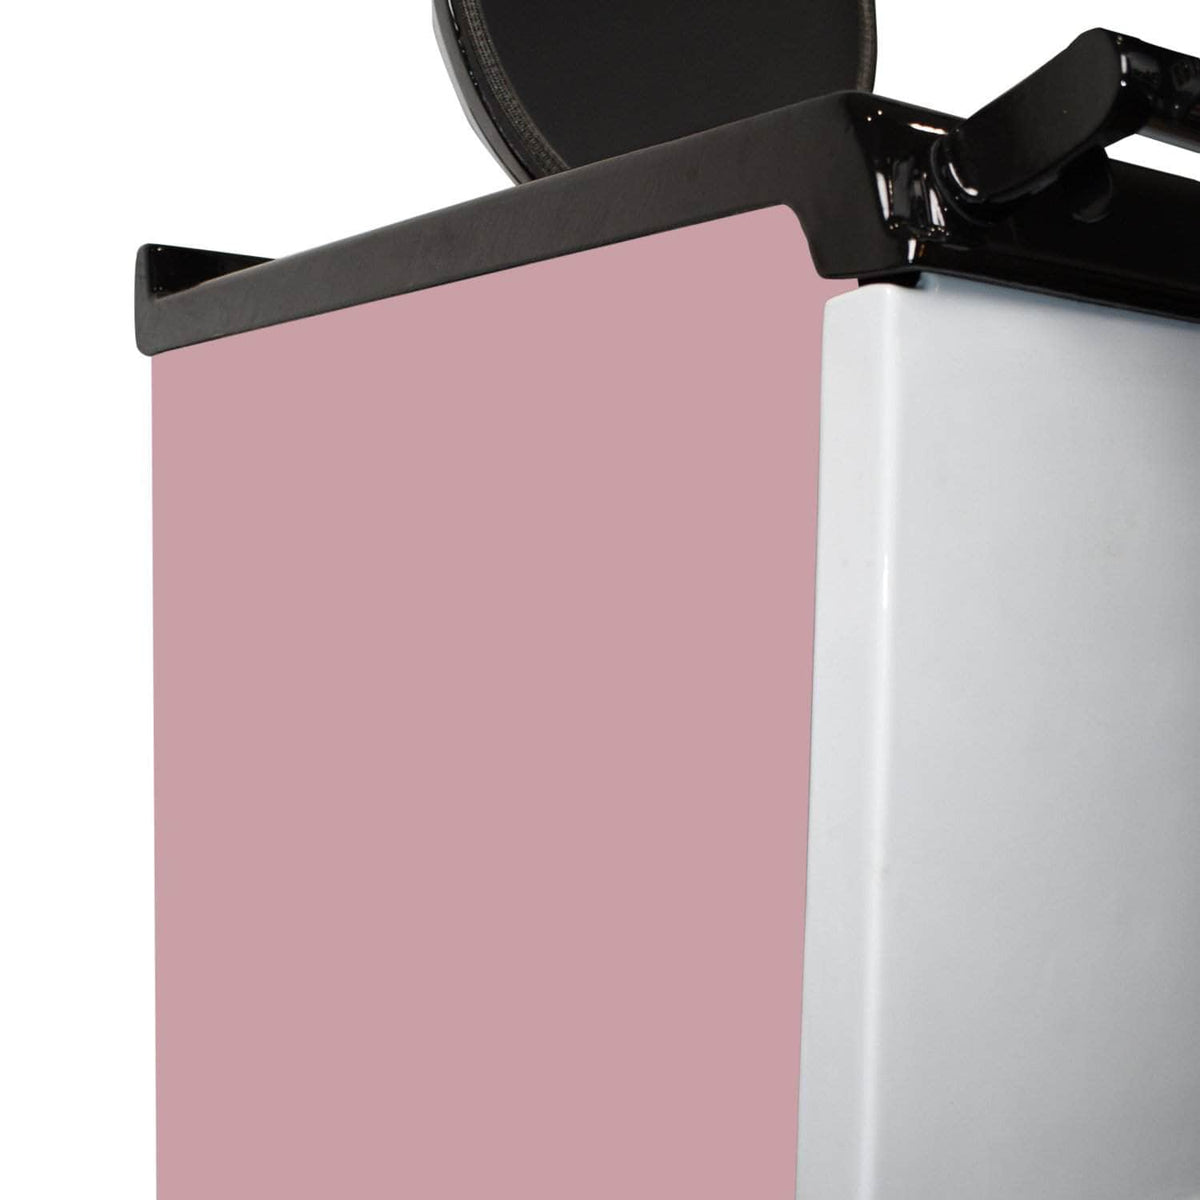 Side panels for use with &#39;Standard&#39; Aga range cooker Pink